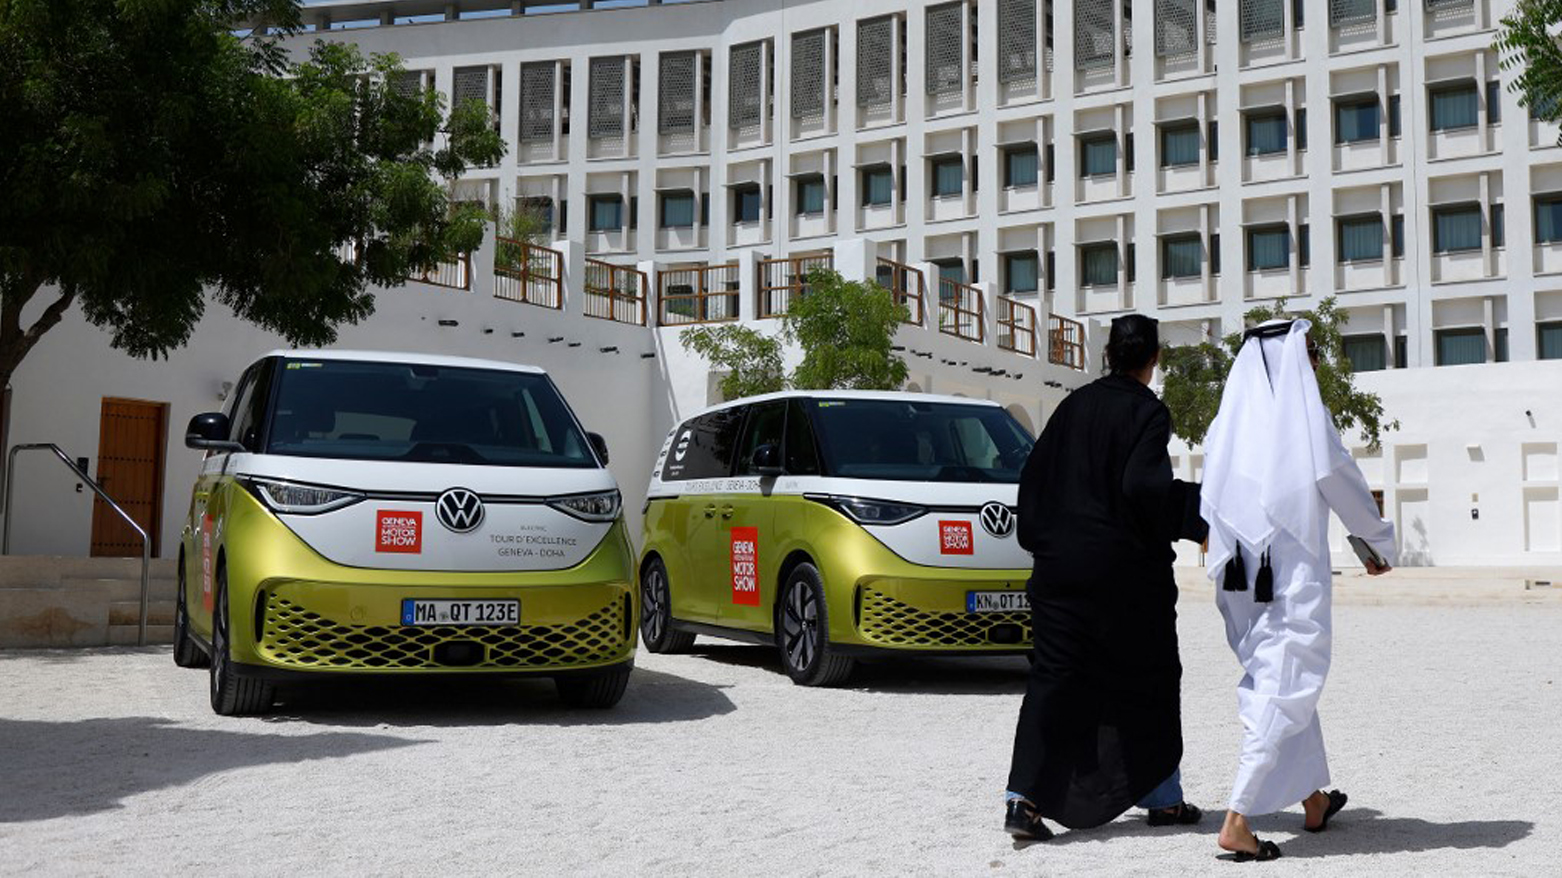 Swissled team drives electric vans from Geneva to Doha